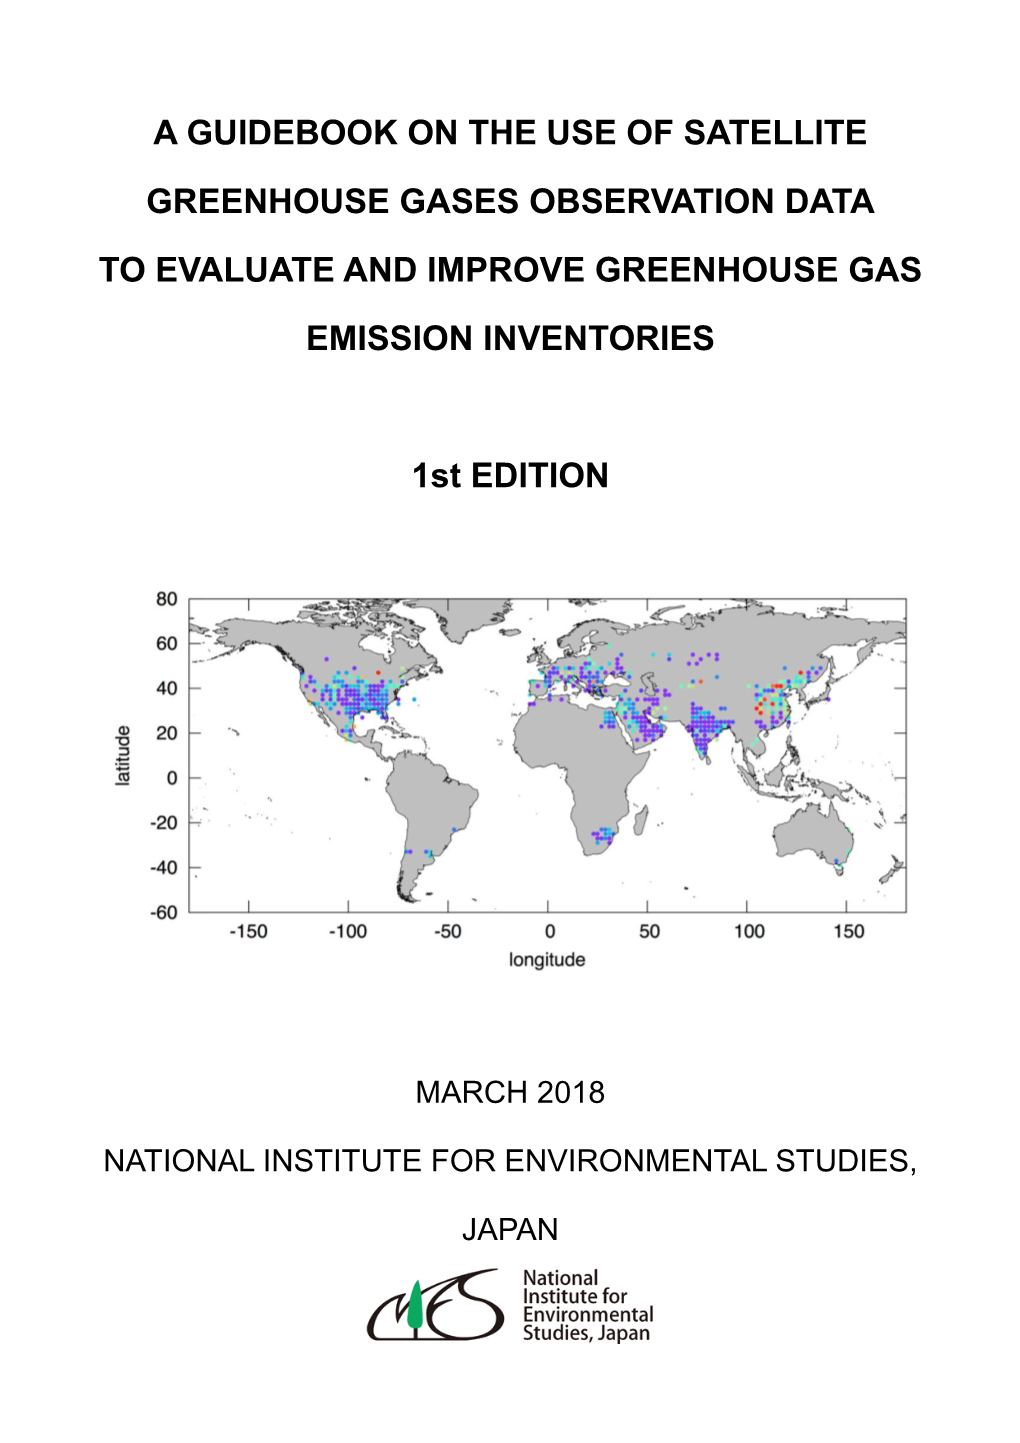 A Guidebook on the Use of Satellite Greenhouse Gases Observation Data to Evaluate and Improve Greenhouse Gas Emission Inventorie